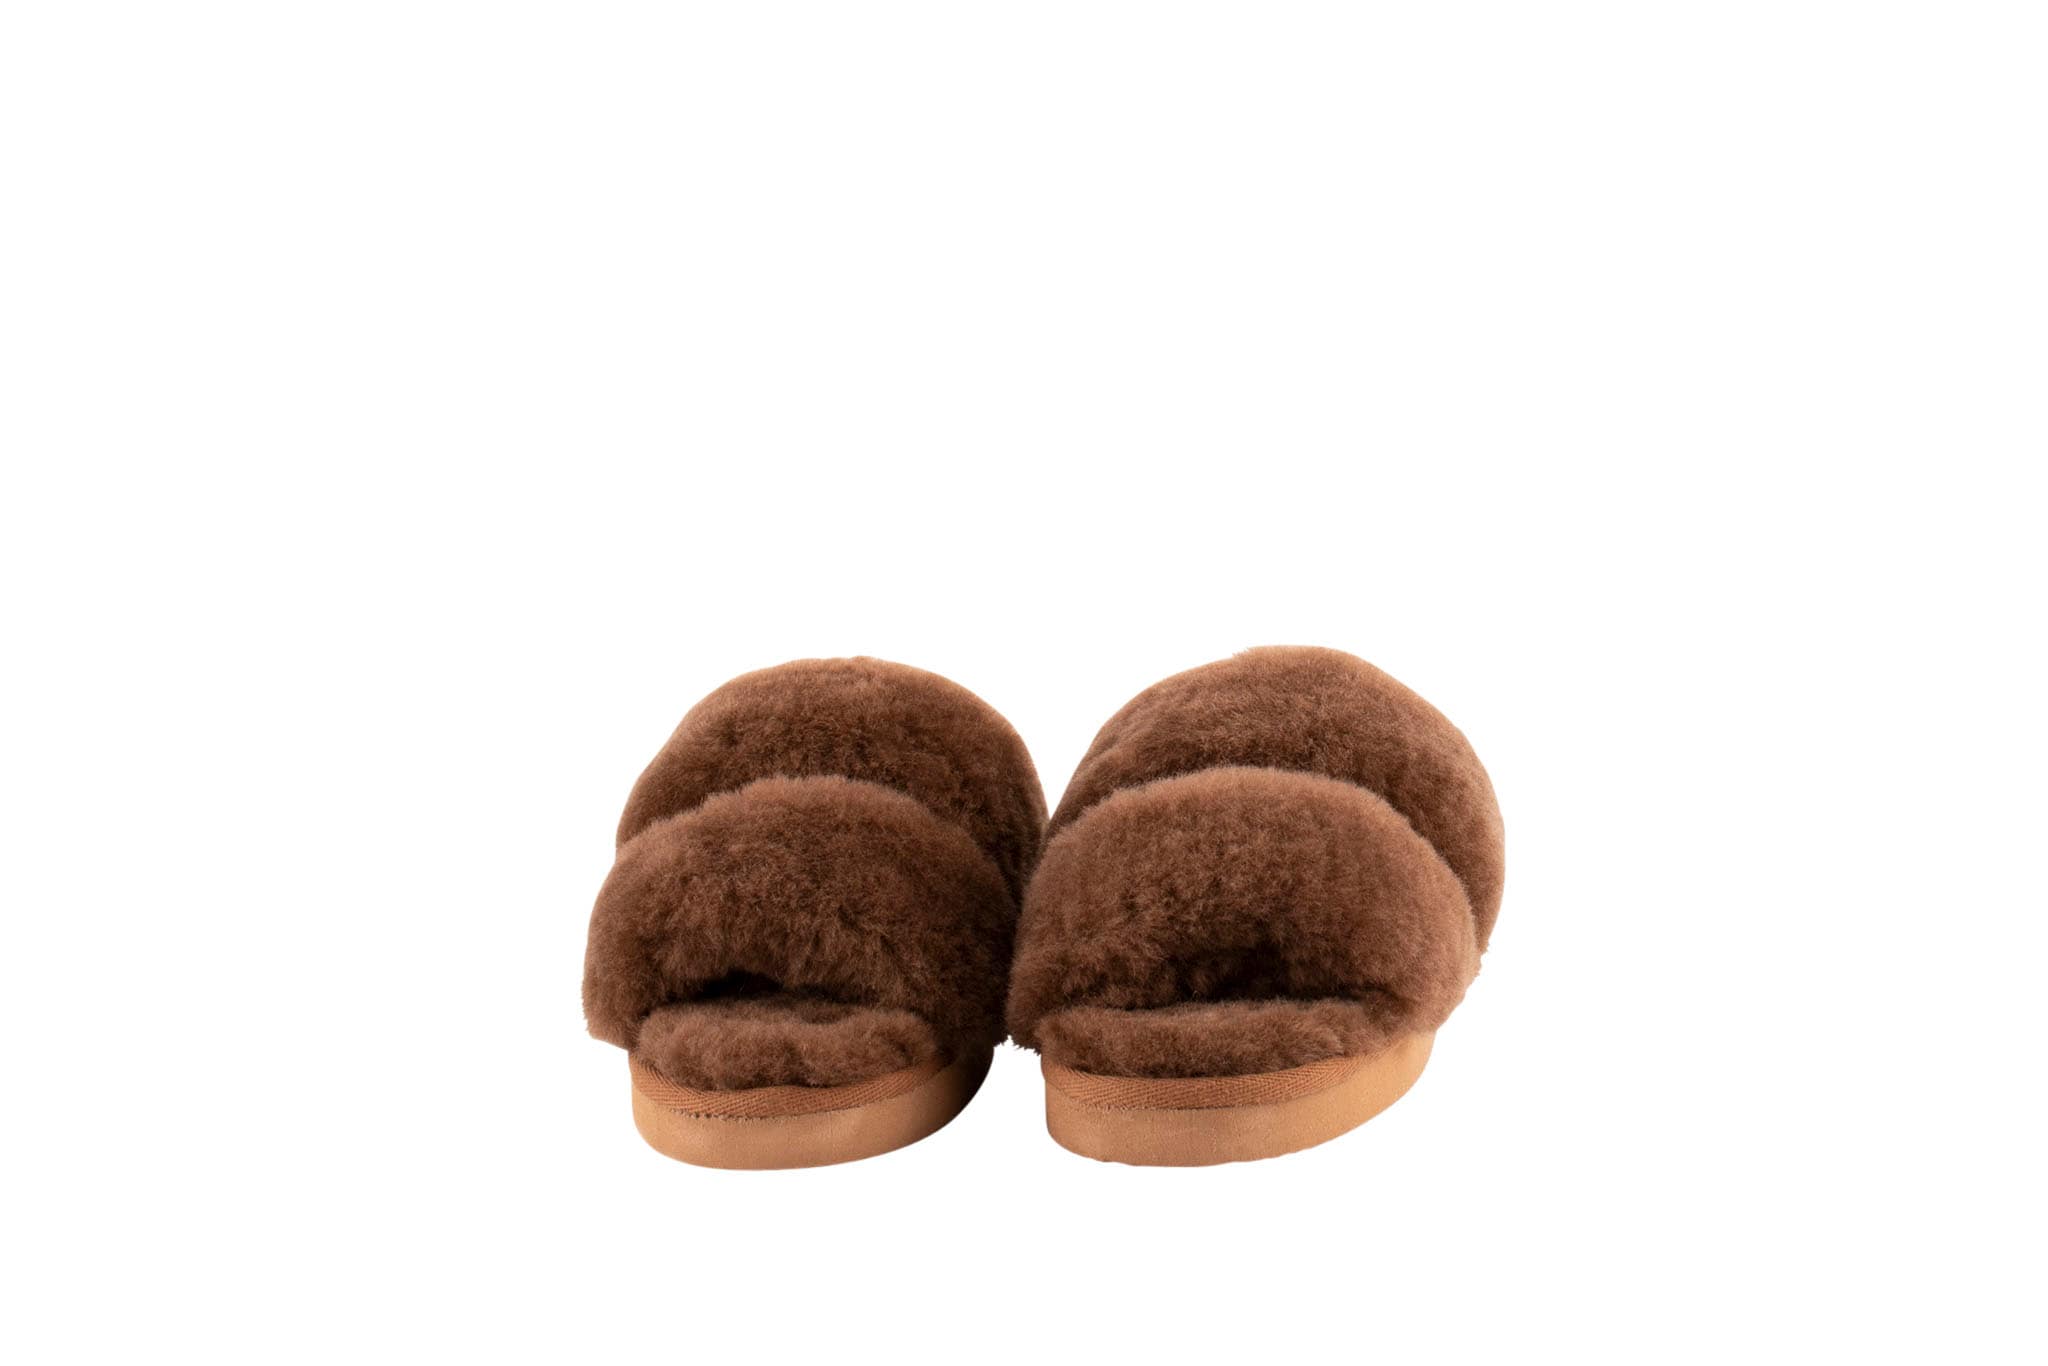 Thelma slippers